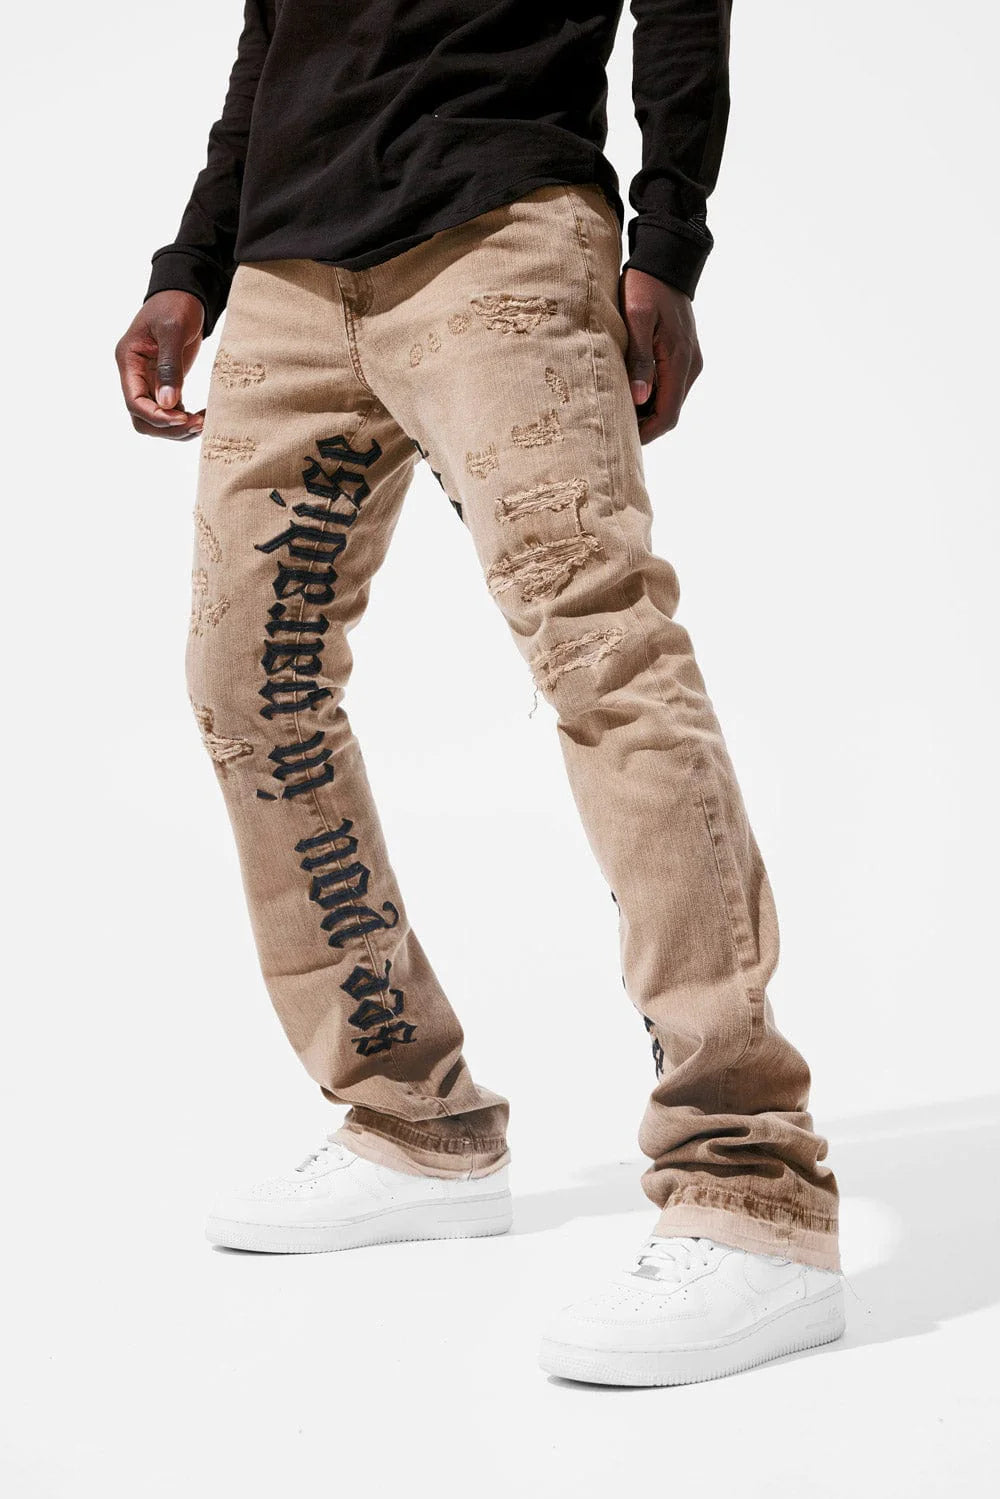 Martin Stacked - See You In Paradise Denim Jeans - Khaki